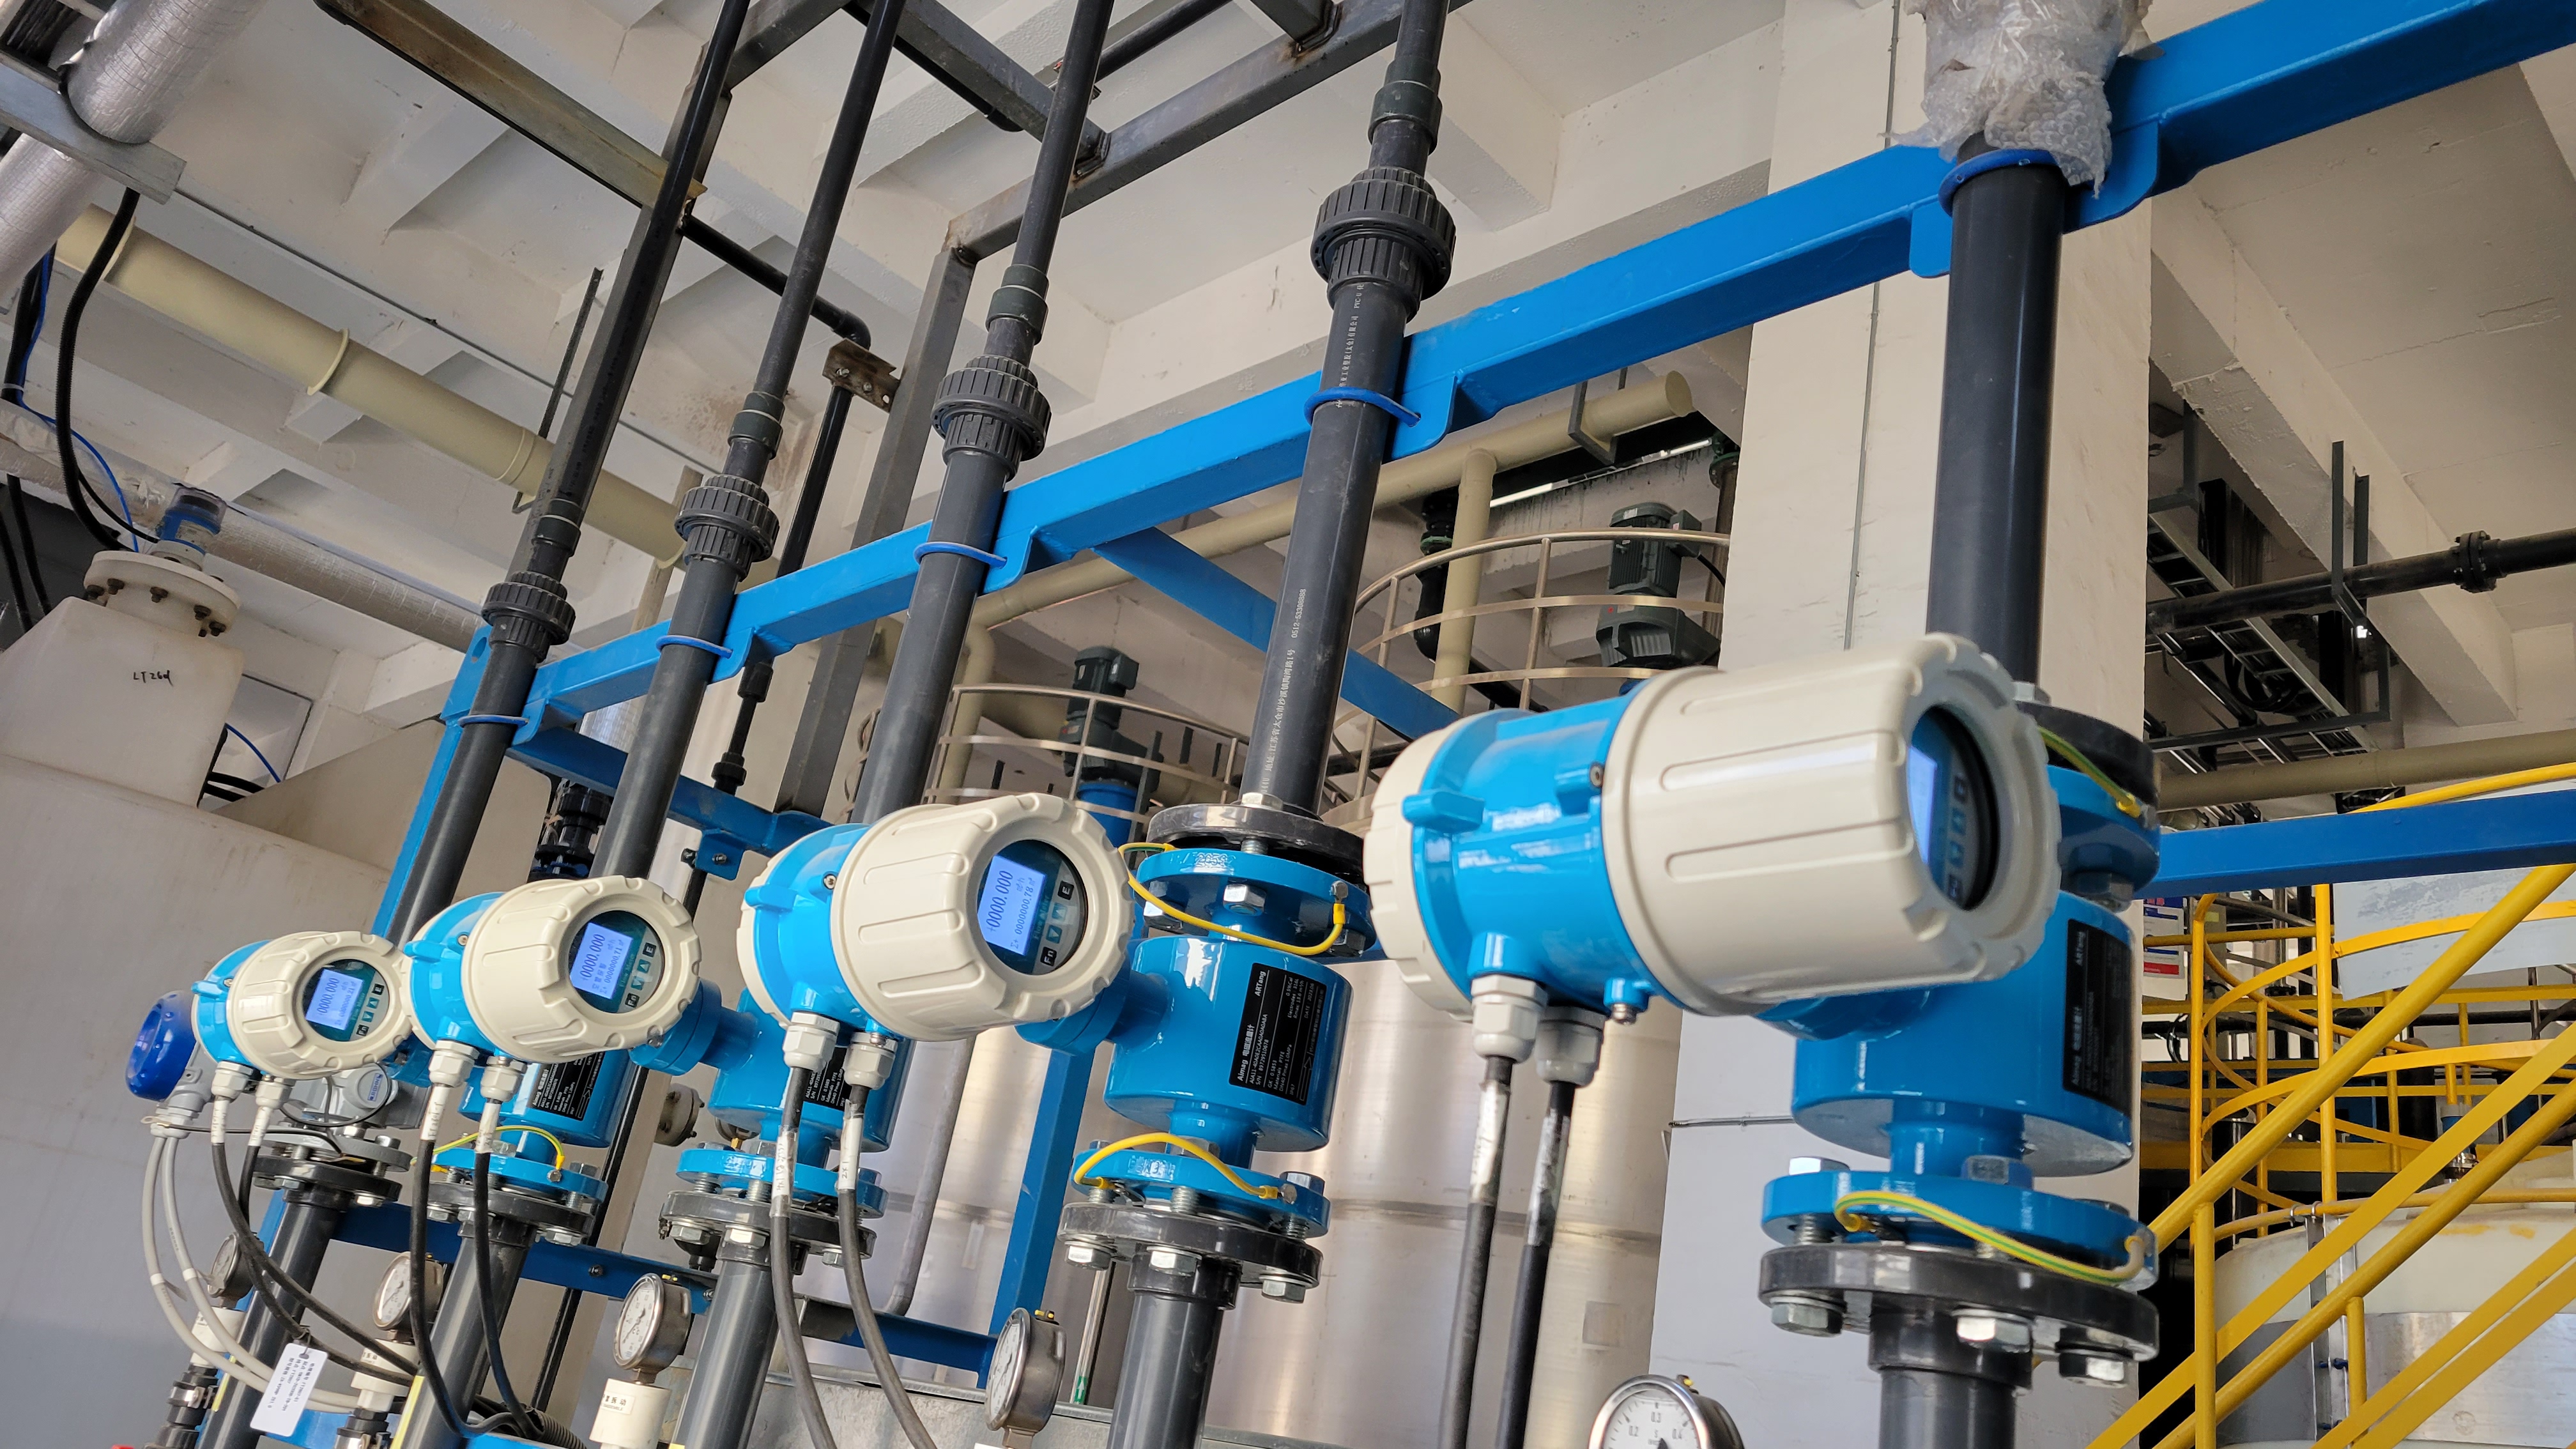 What are the differences between electromagnetic flowmeters and ordinary water meters?